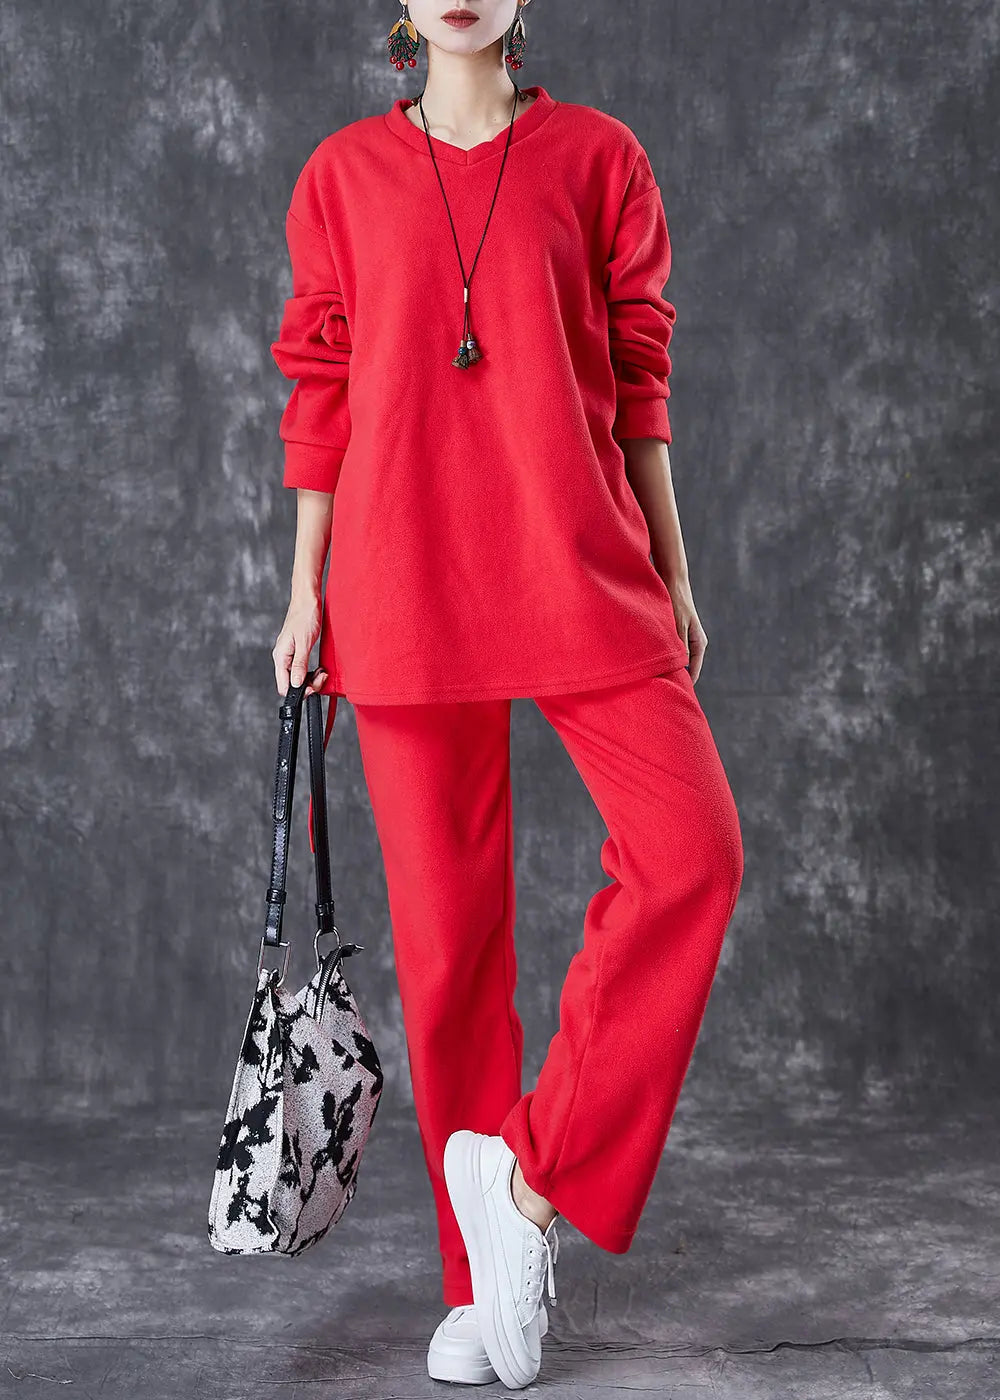 Casual Red Oversized Drawstring Velour Women Sets 2 Pieces Fall Ada Fashion